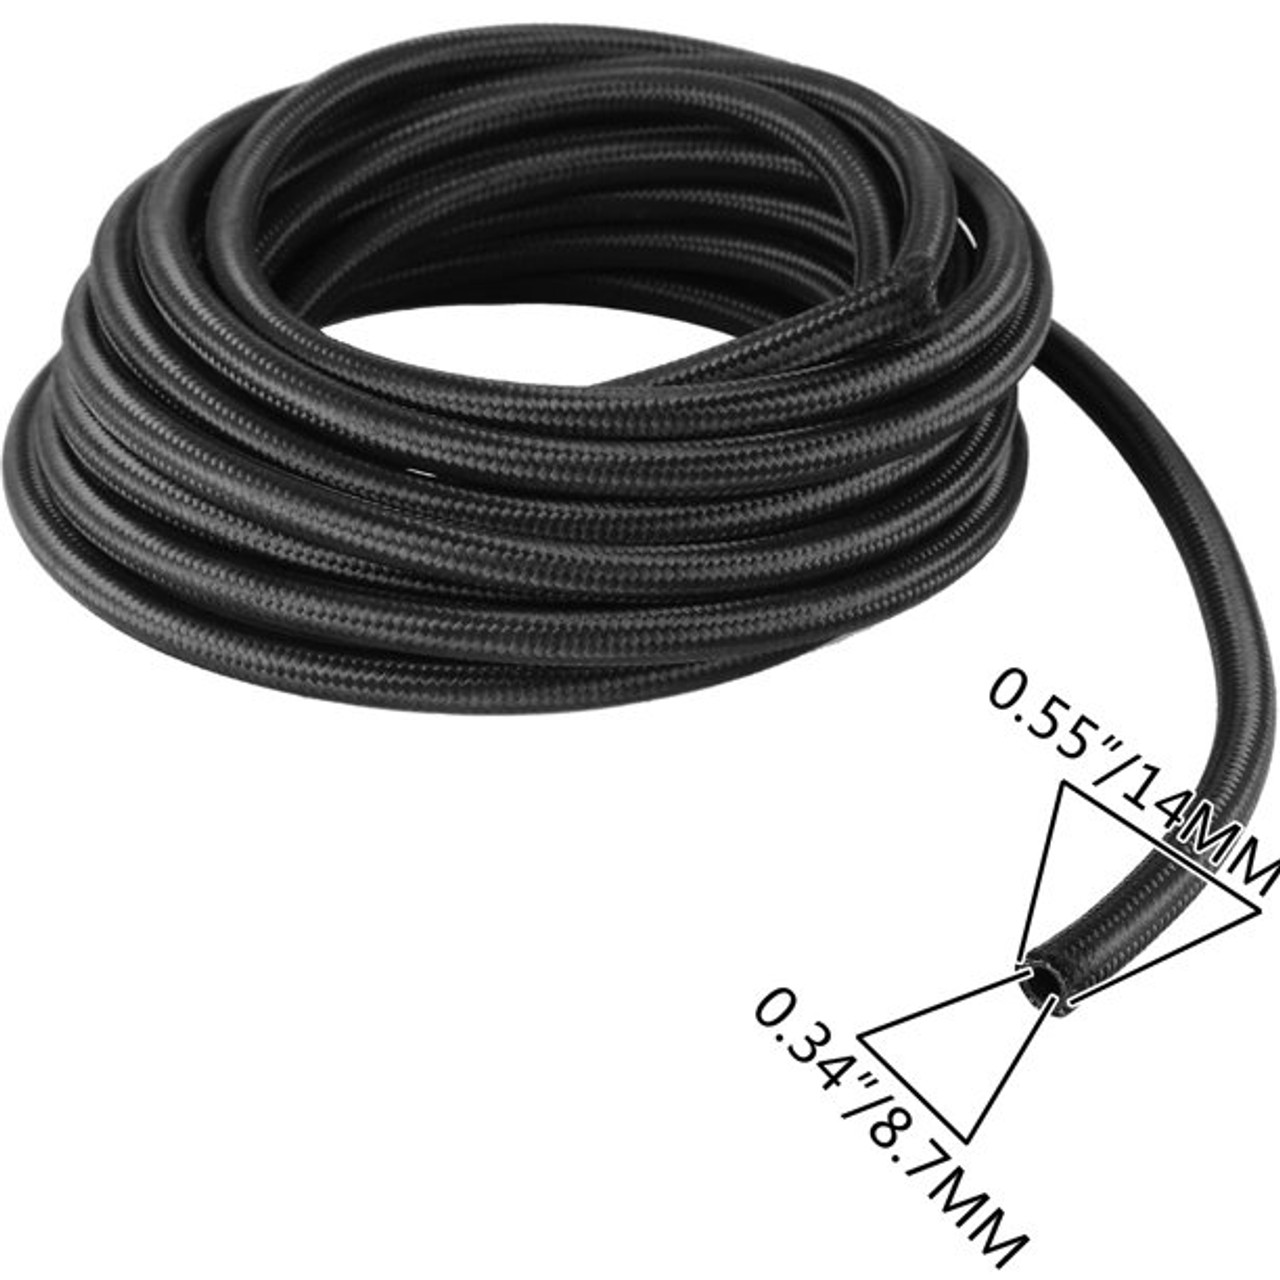 6AN 32.8FT Stainless Steel Nylon Braided Oil Gas Fuel Line Hose